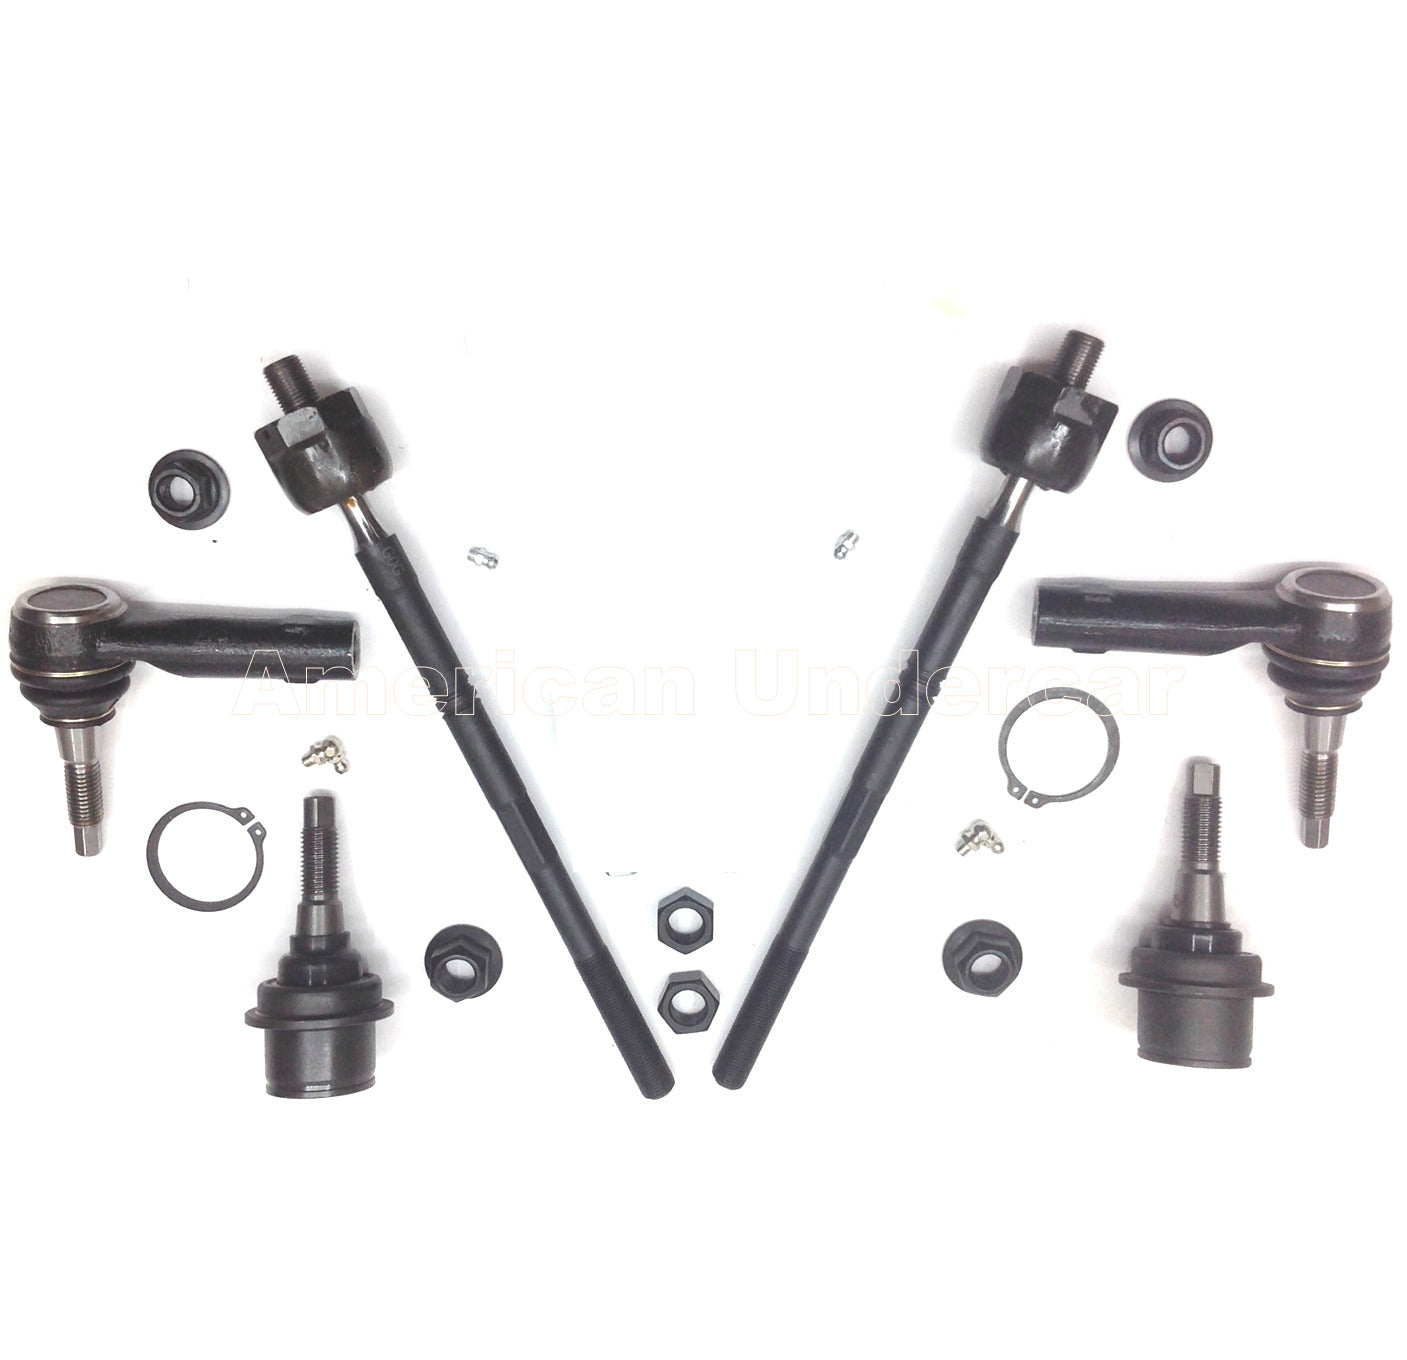 Lifetime Ball Joints Tie Rod Steering Kit for 2010-2013 Ford Transit Connect 2WD